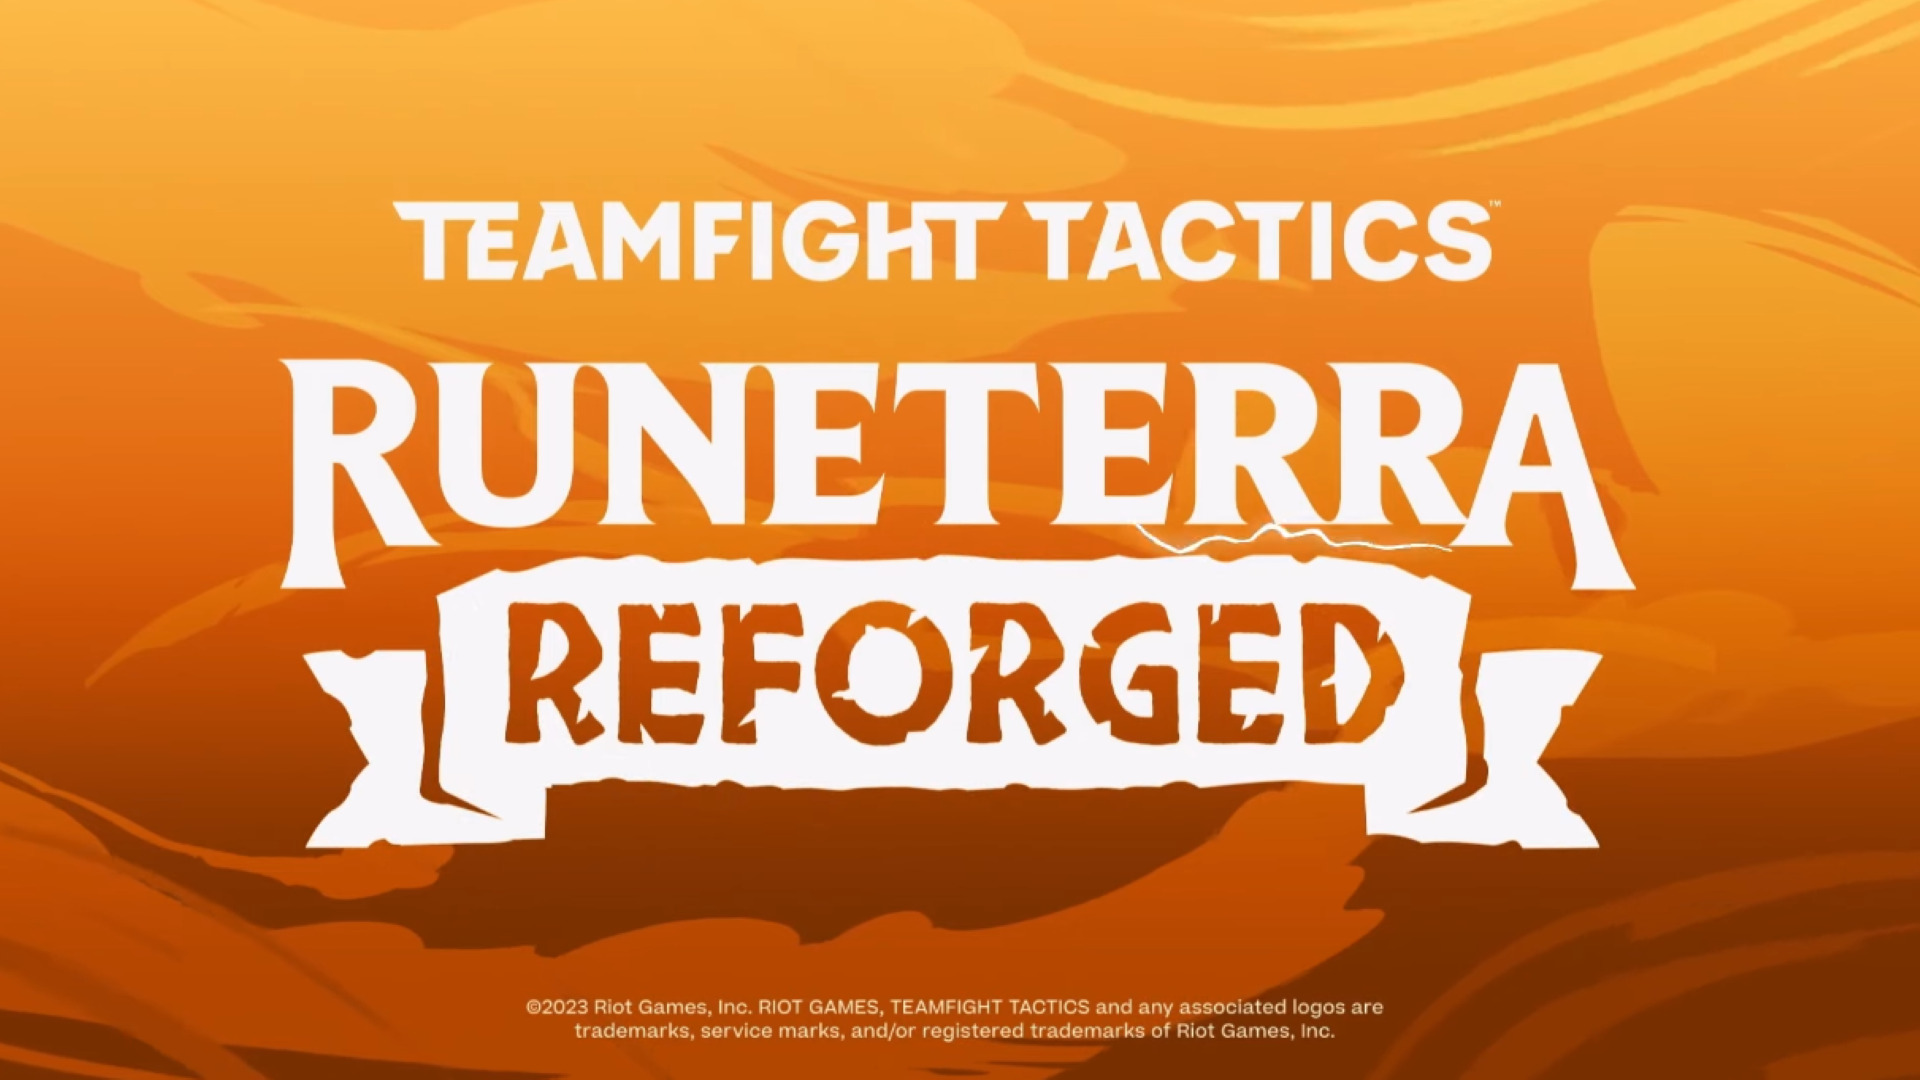 Everything to learn about TFT Set 9 - Runeterra Reforged